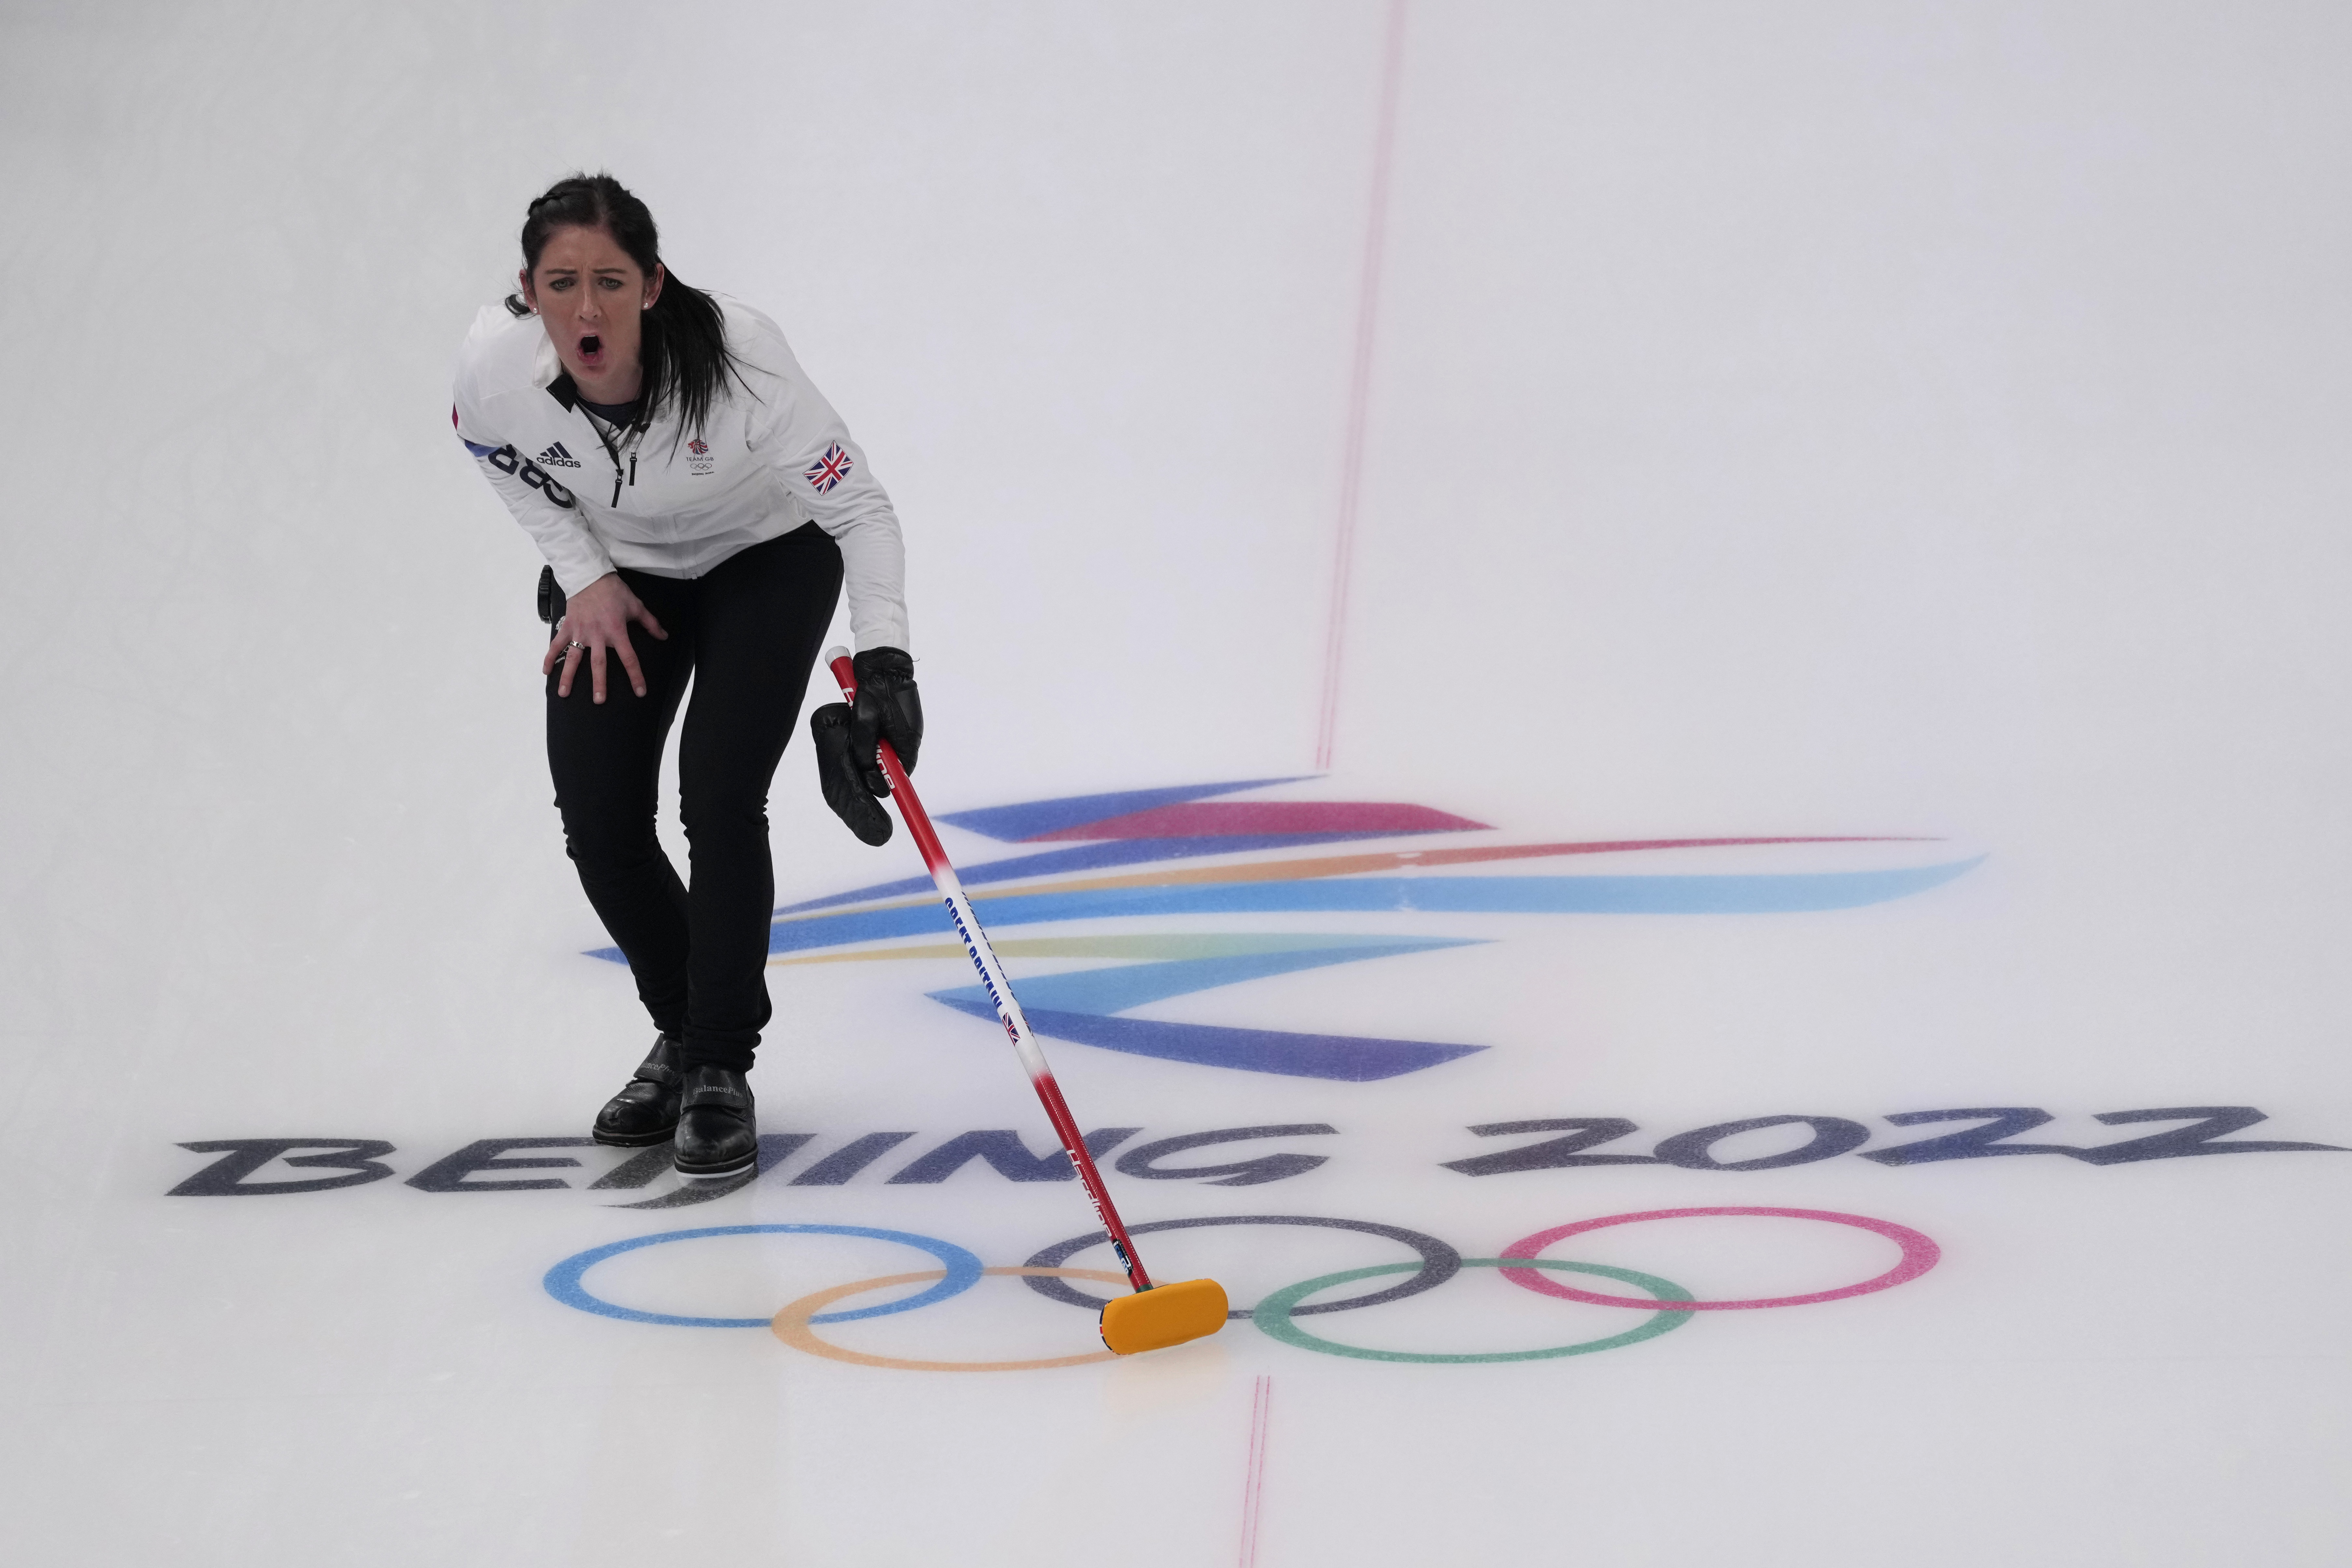 Womens curling gold medal game Live stream, start time, TV, watch Great Britain vs